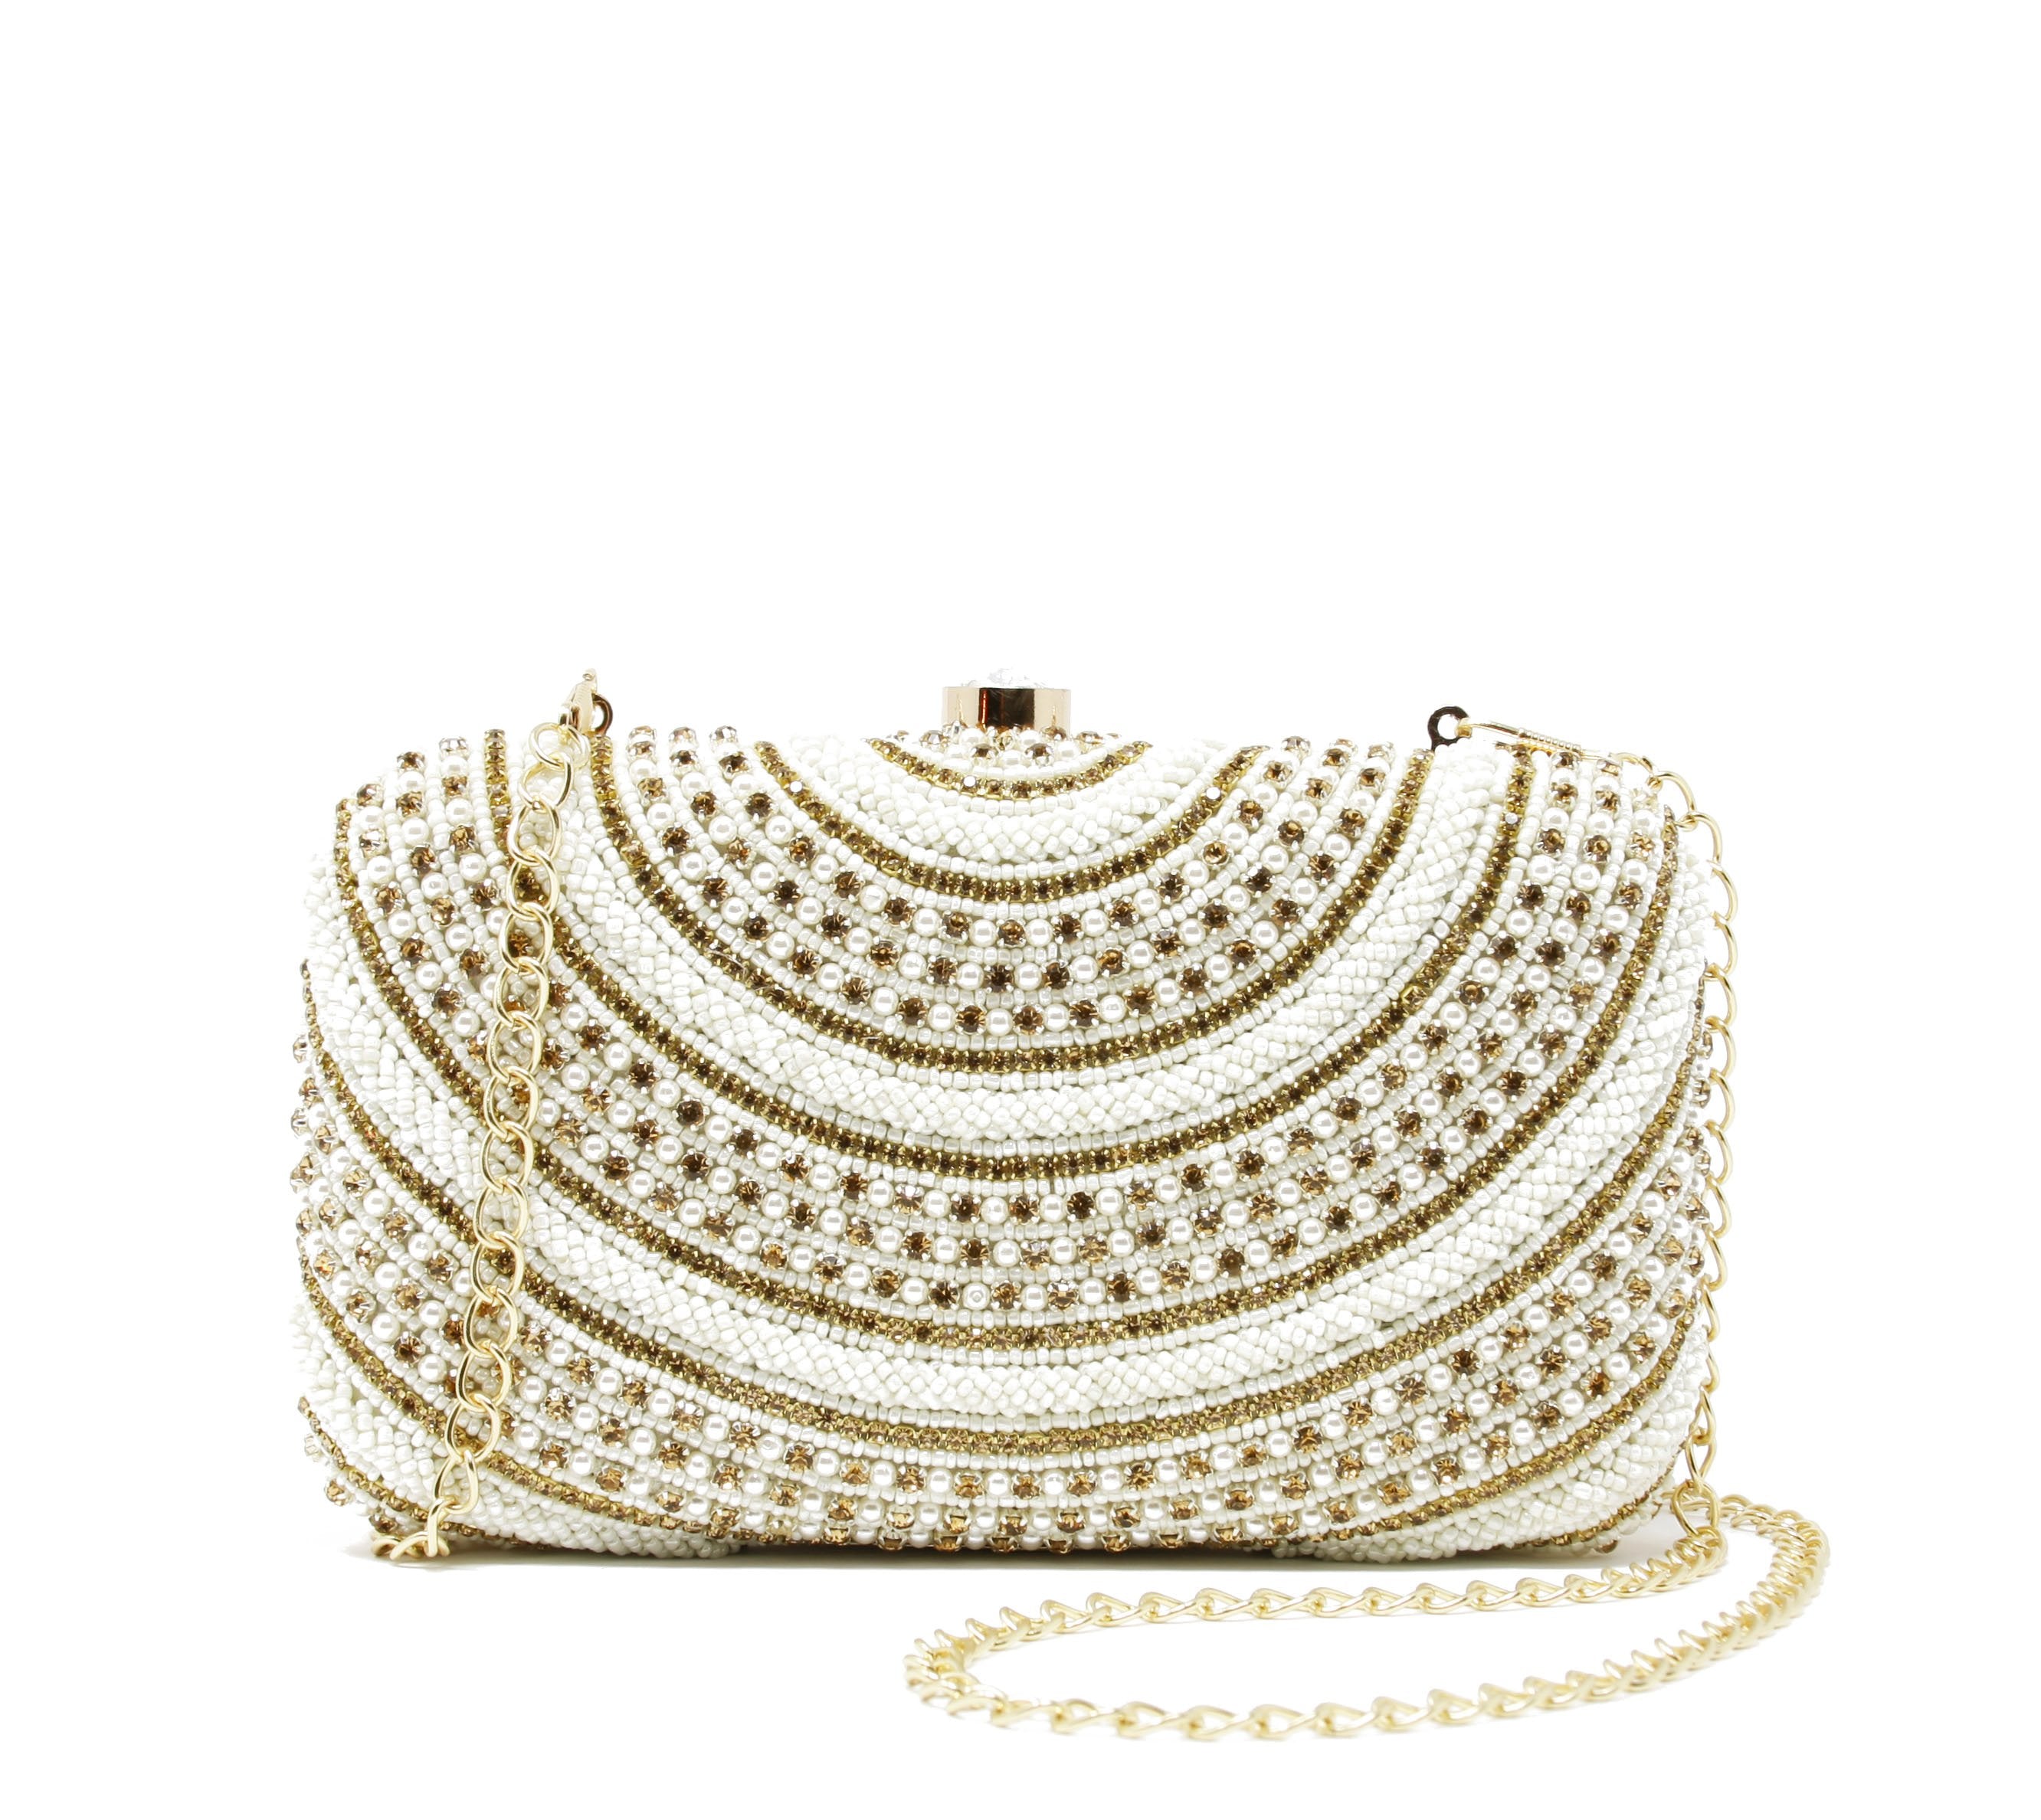 Ivory and white clutch with plain off-white back & has Gold chain strap